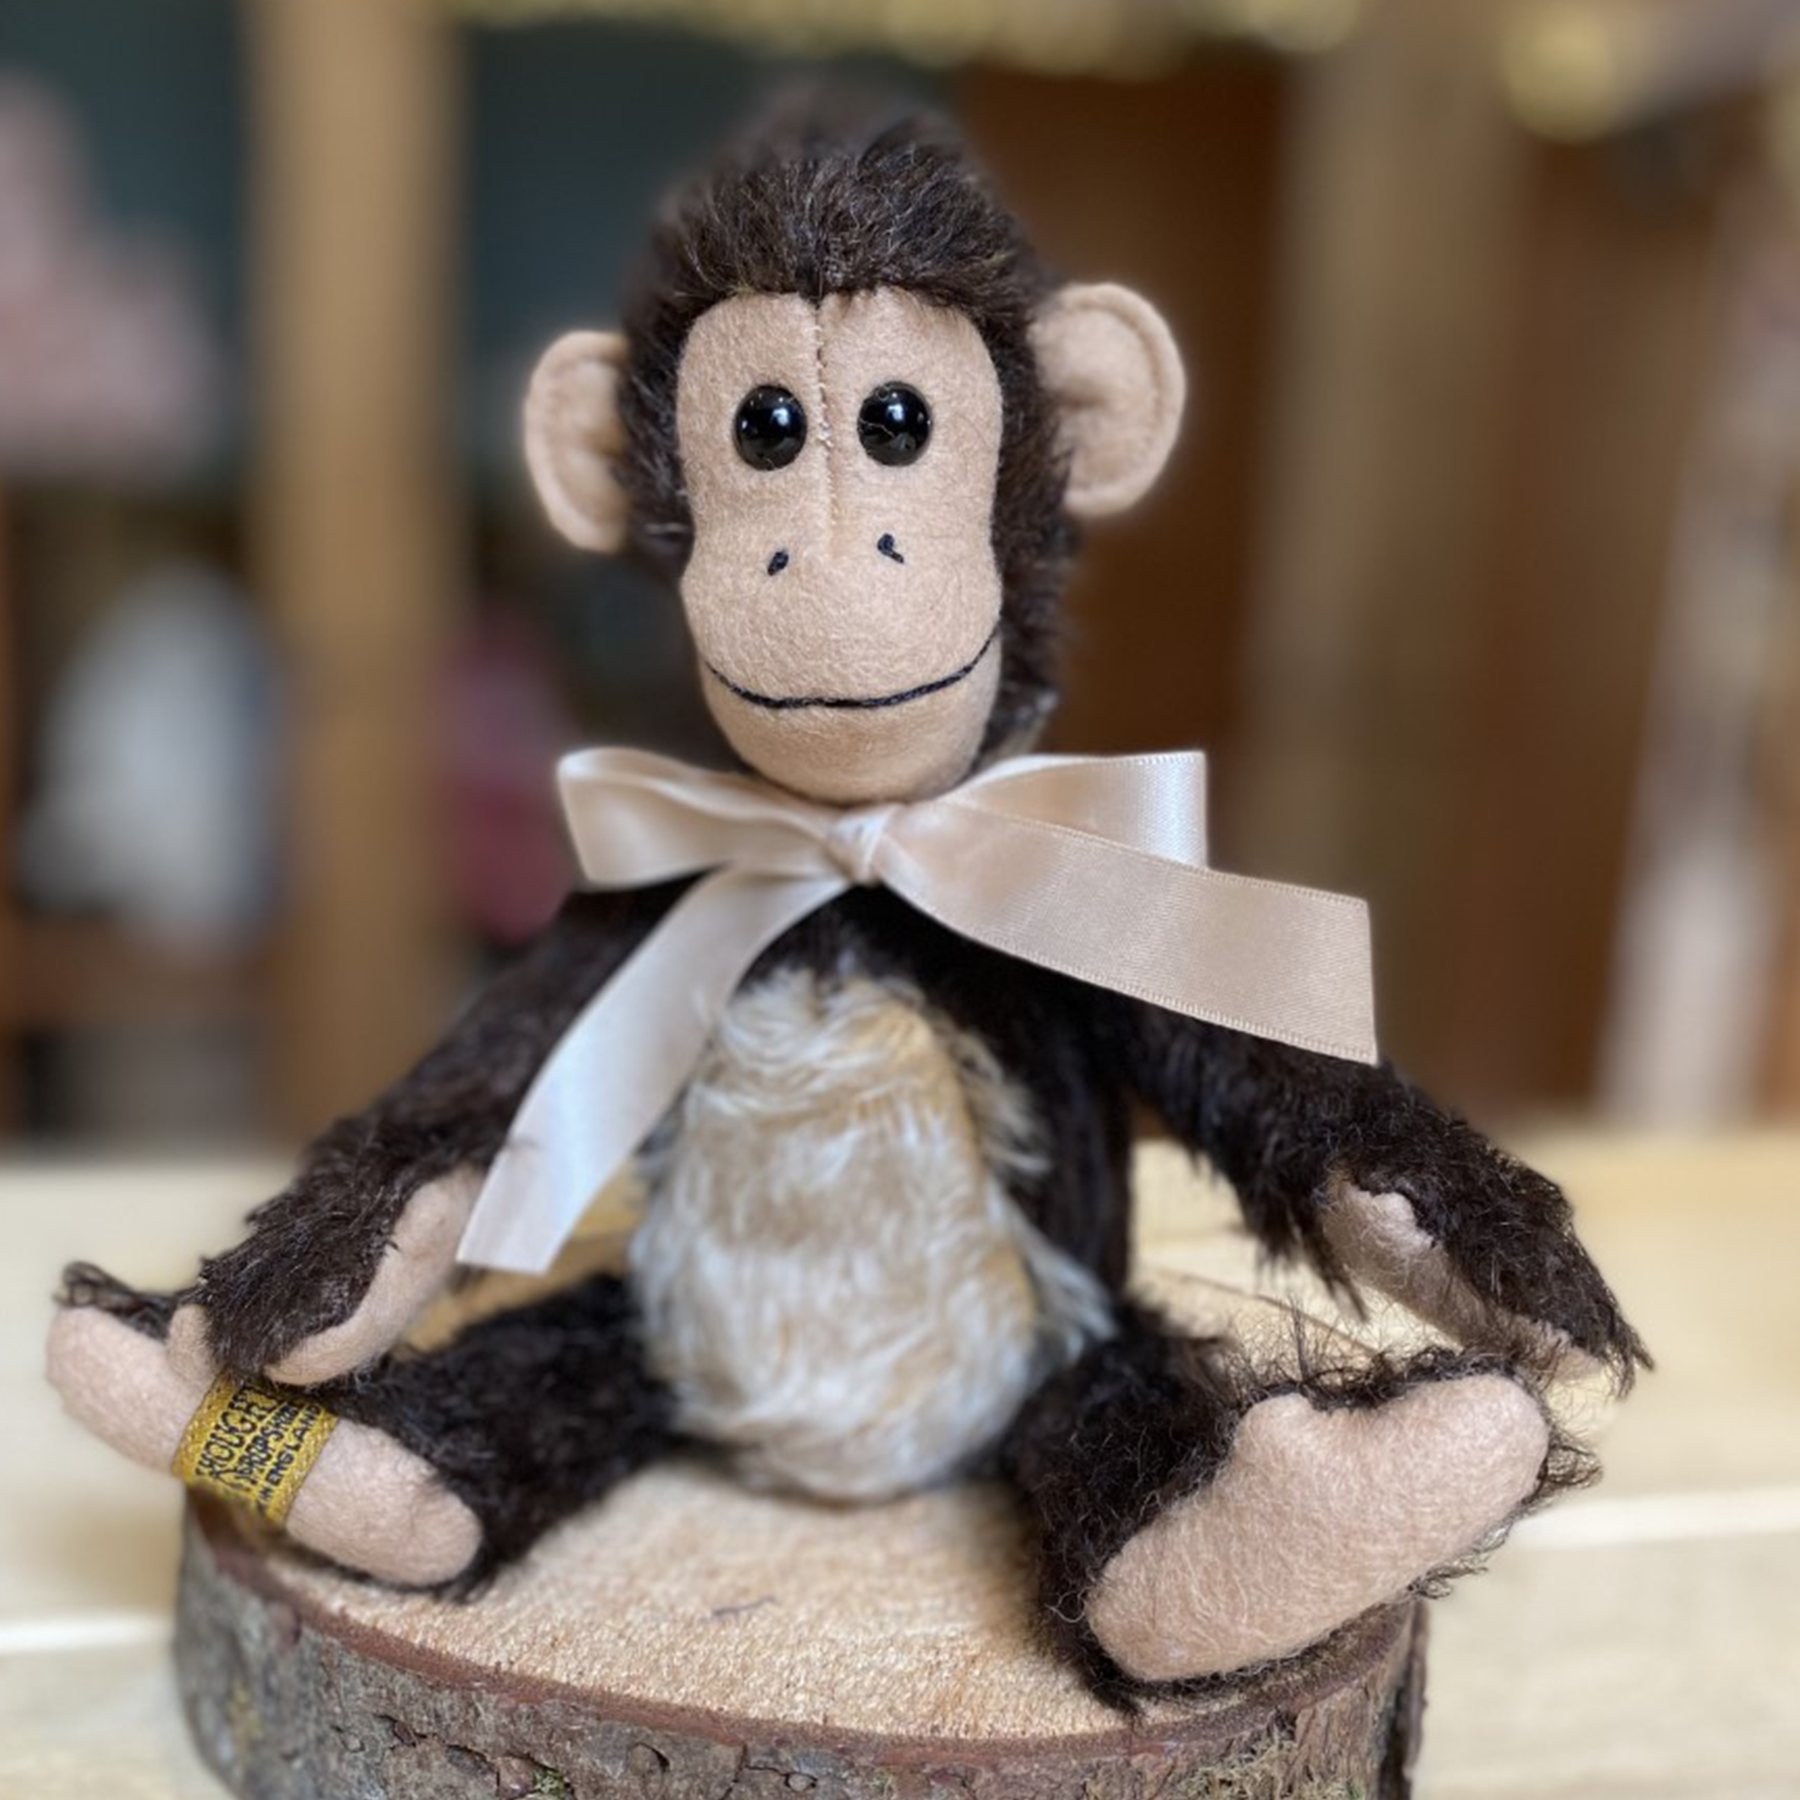 Milo's enchanting expression is sure to capture the hearts of everyone who meets him. His peachy-beige wool felt hands, feet and smiley face beautifully accompany dark-mahogany mohair, while an authentic curly monkey's tail truly brings his character to life.